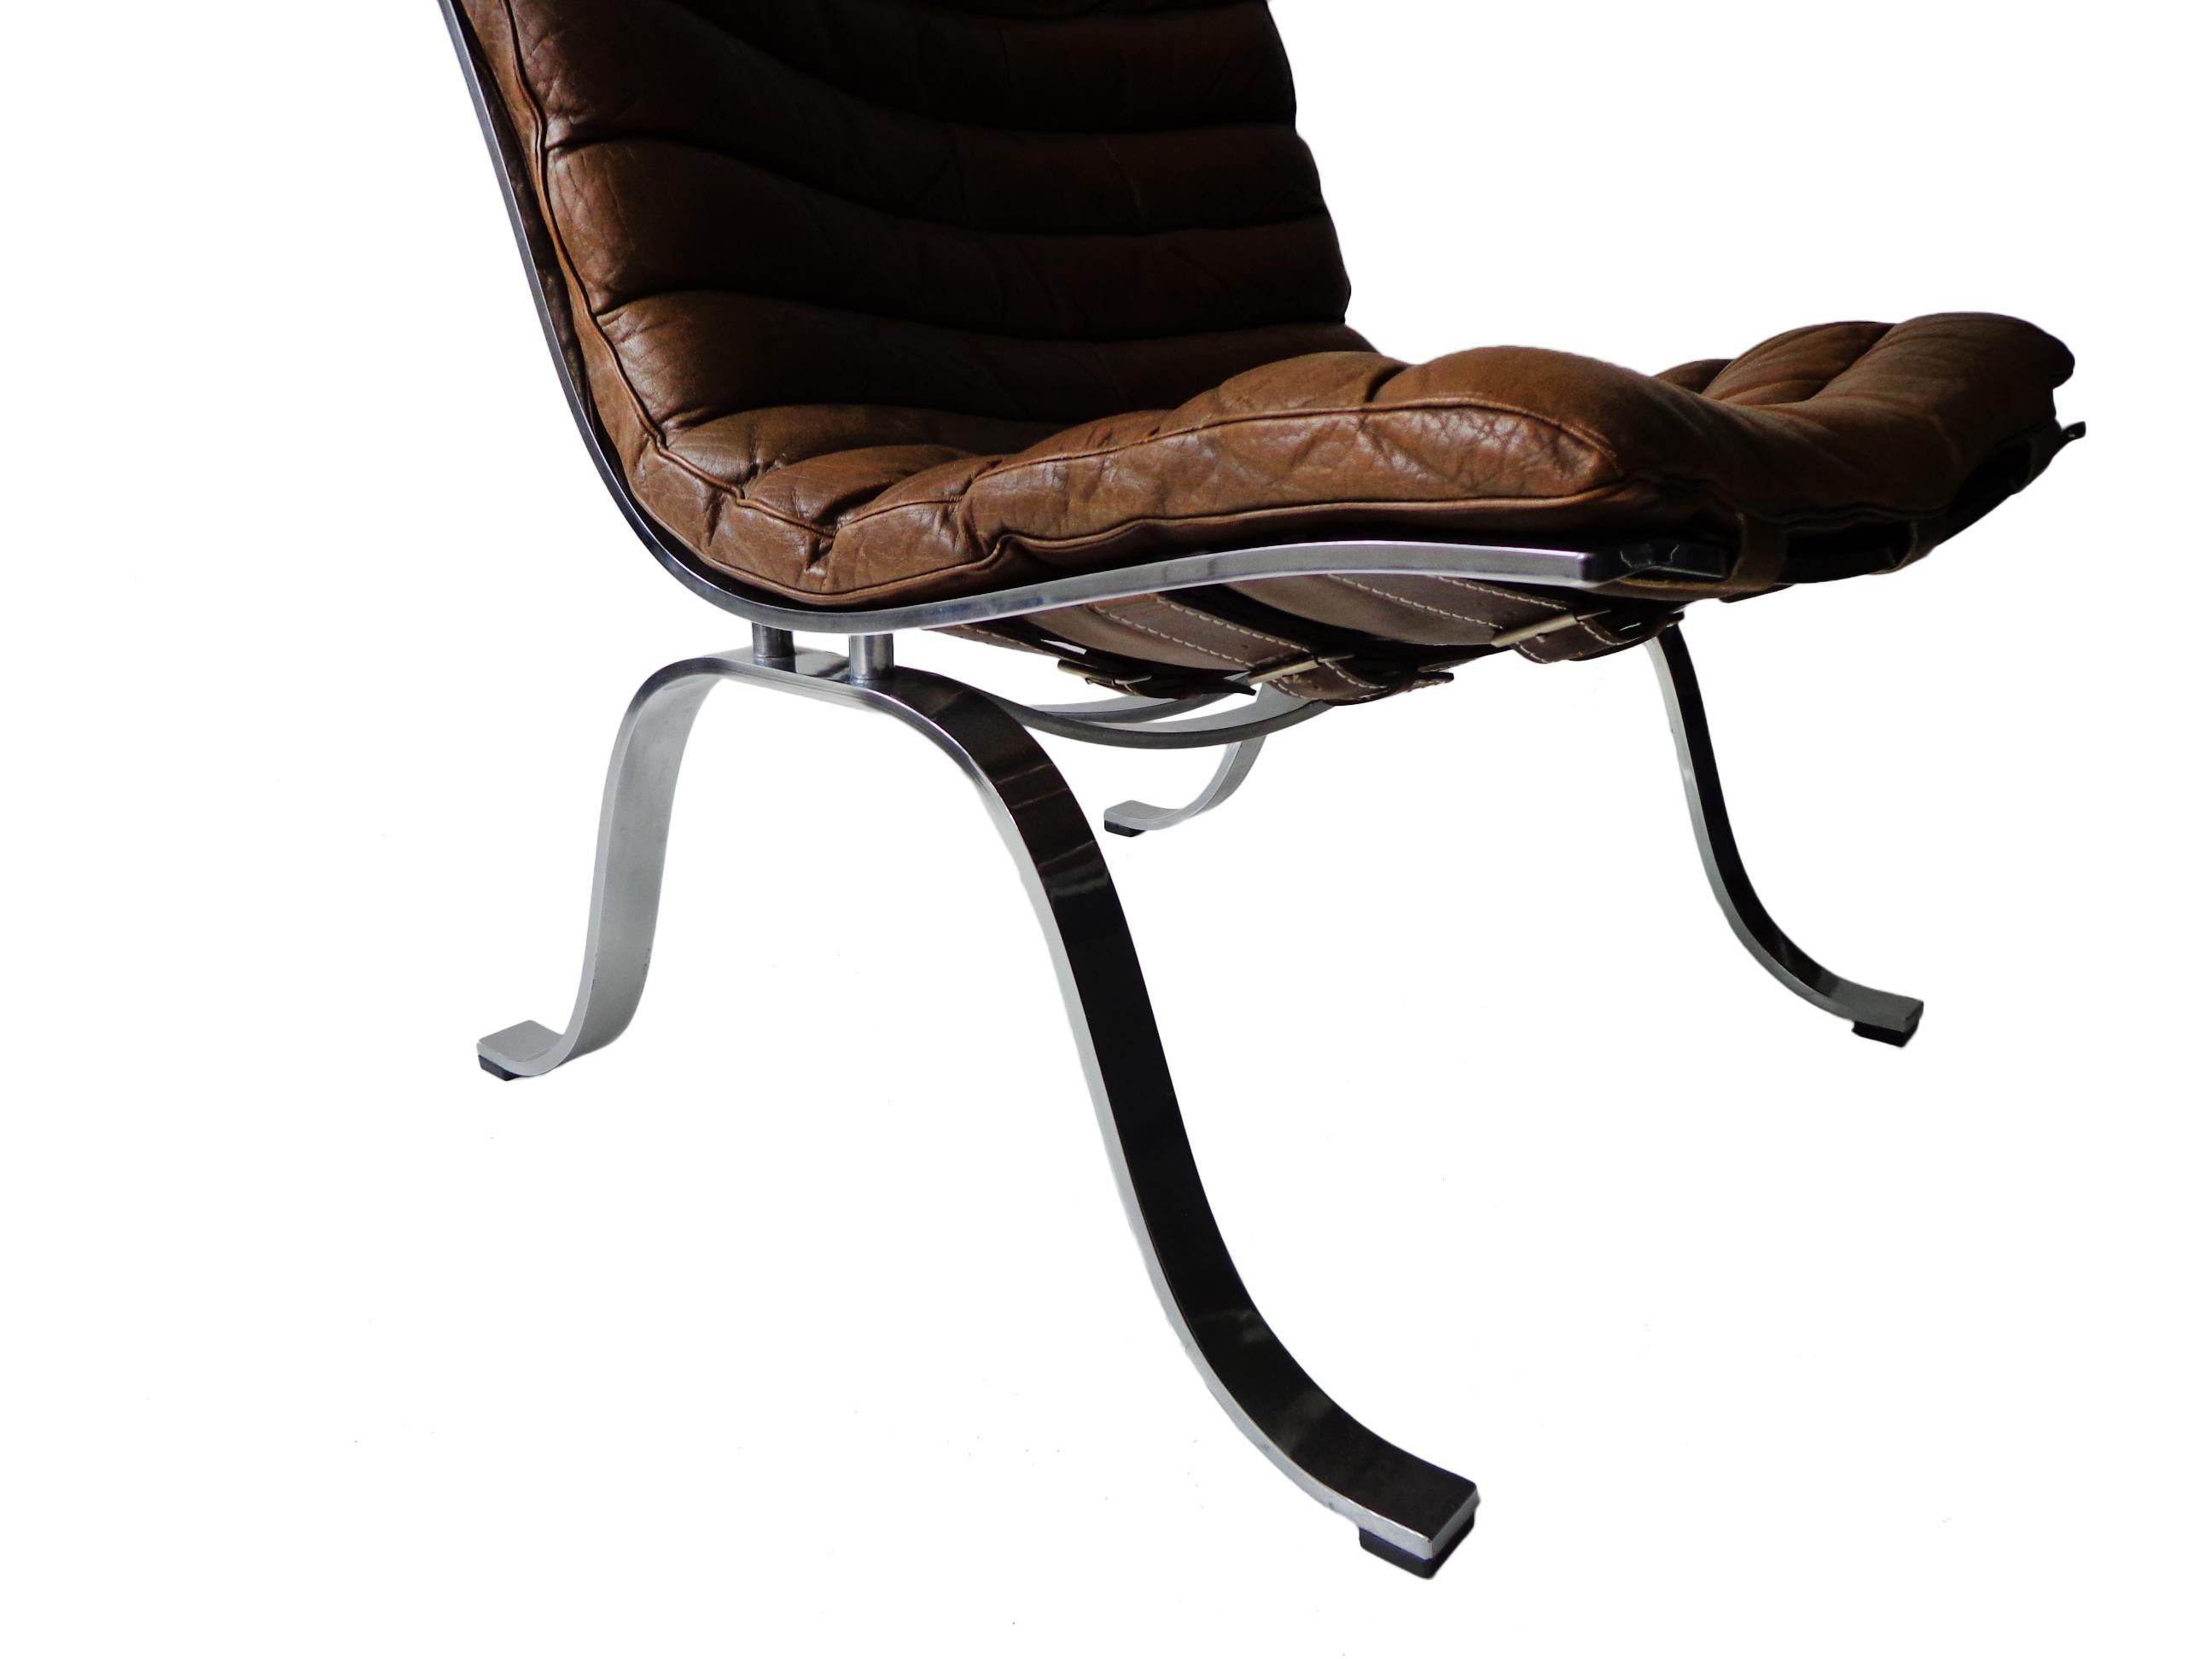 Late 20th Century Arne Norell ‘Ariet’ Lounge Chair in Original Cognac/Brown Leather For Sale